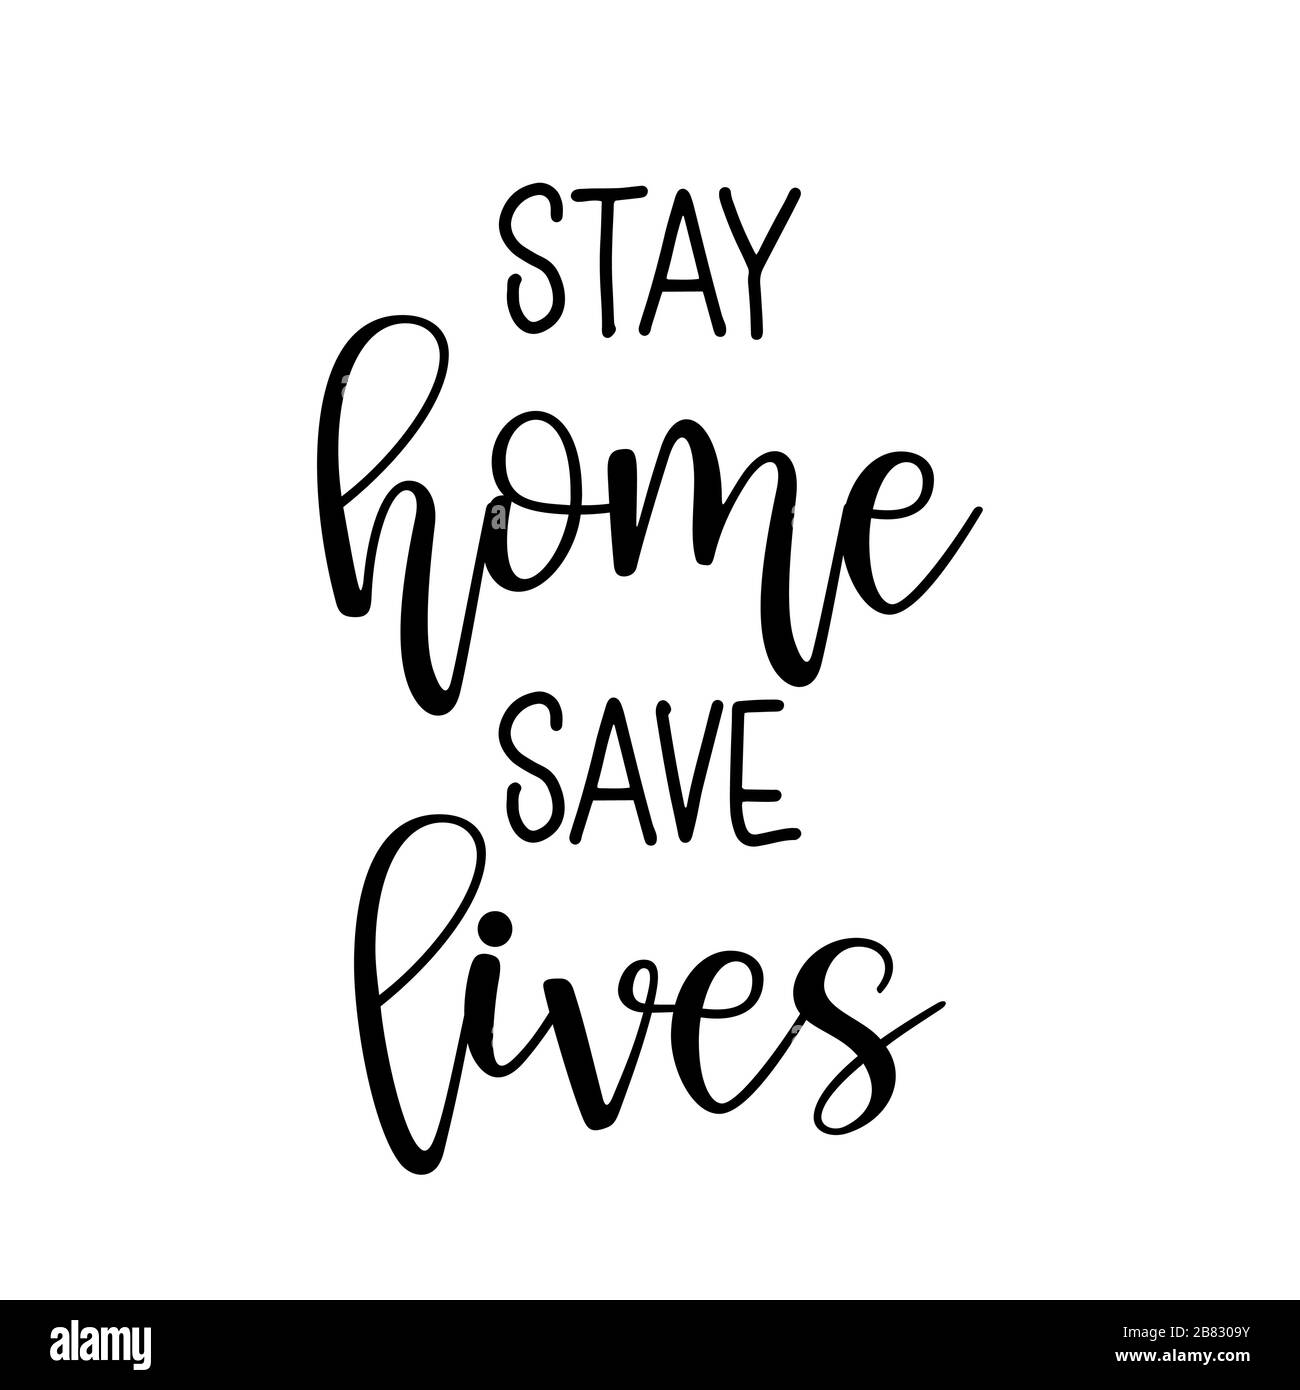 Stay home save lives - Lettering typography poster with text for self quarantine times. Hand letter script motivation sign catch word art design. Vint Stock Vector